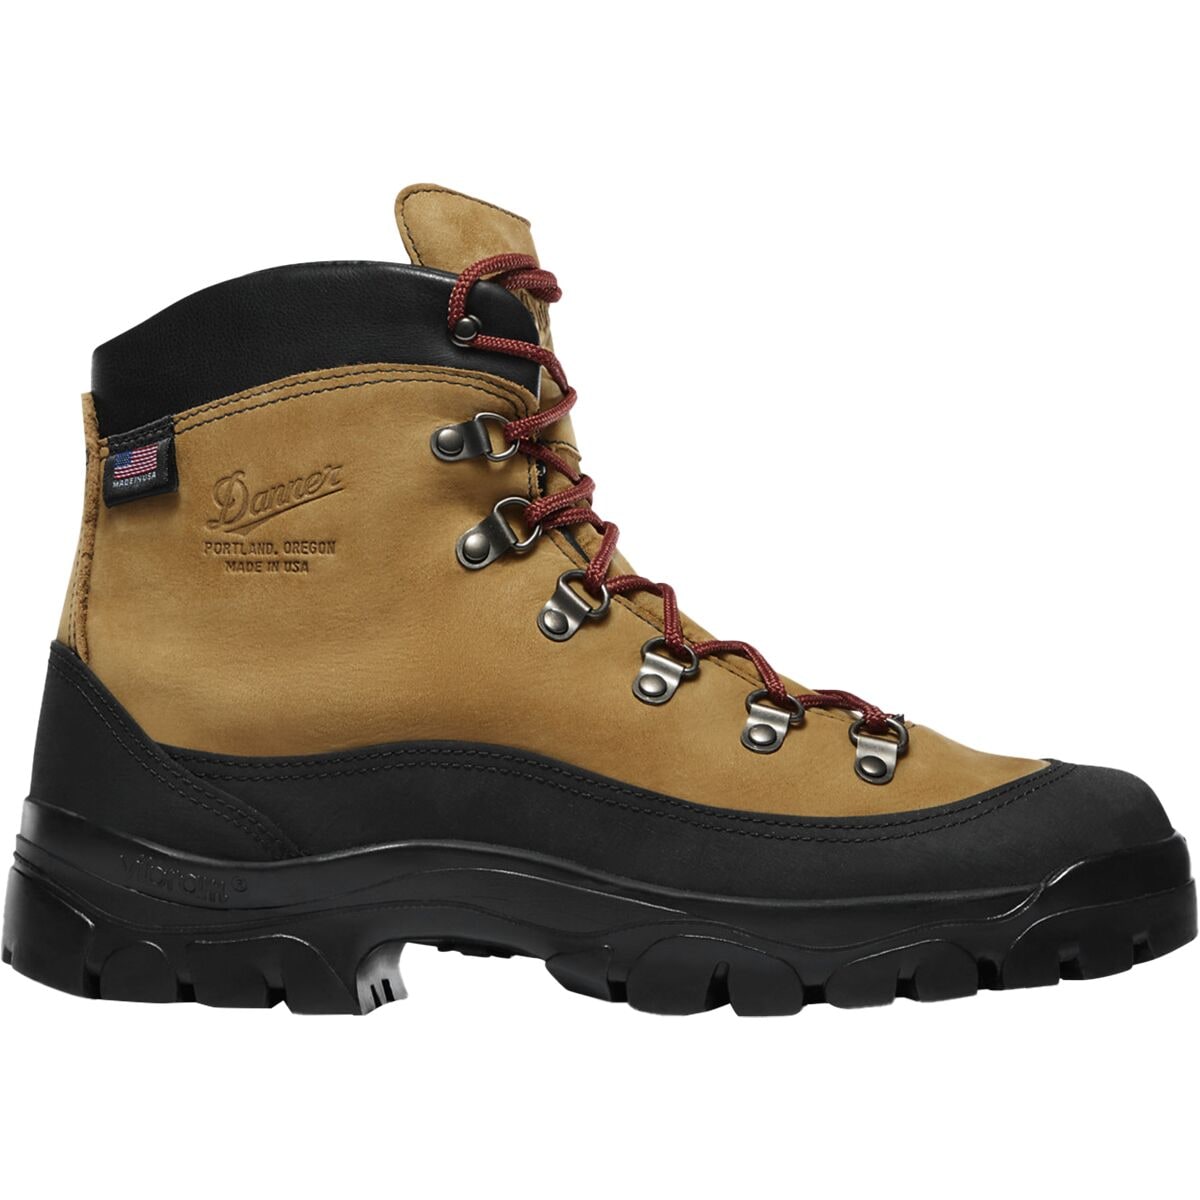 Crater Rim Backpacking Boot - Women